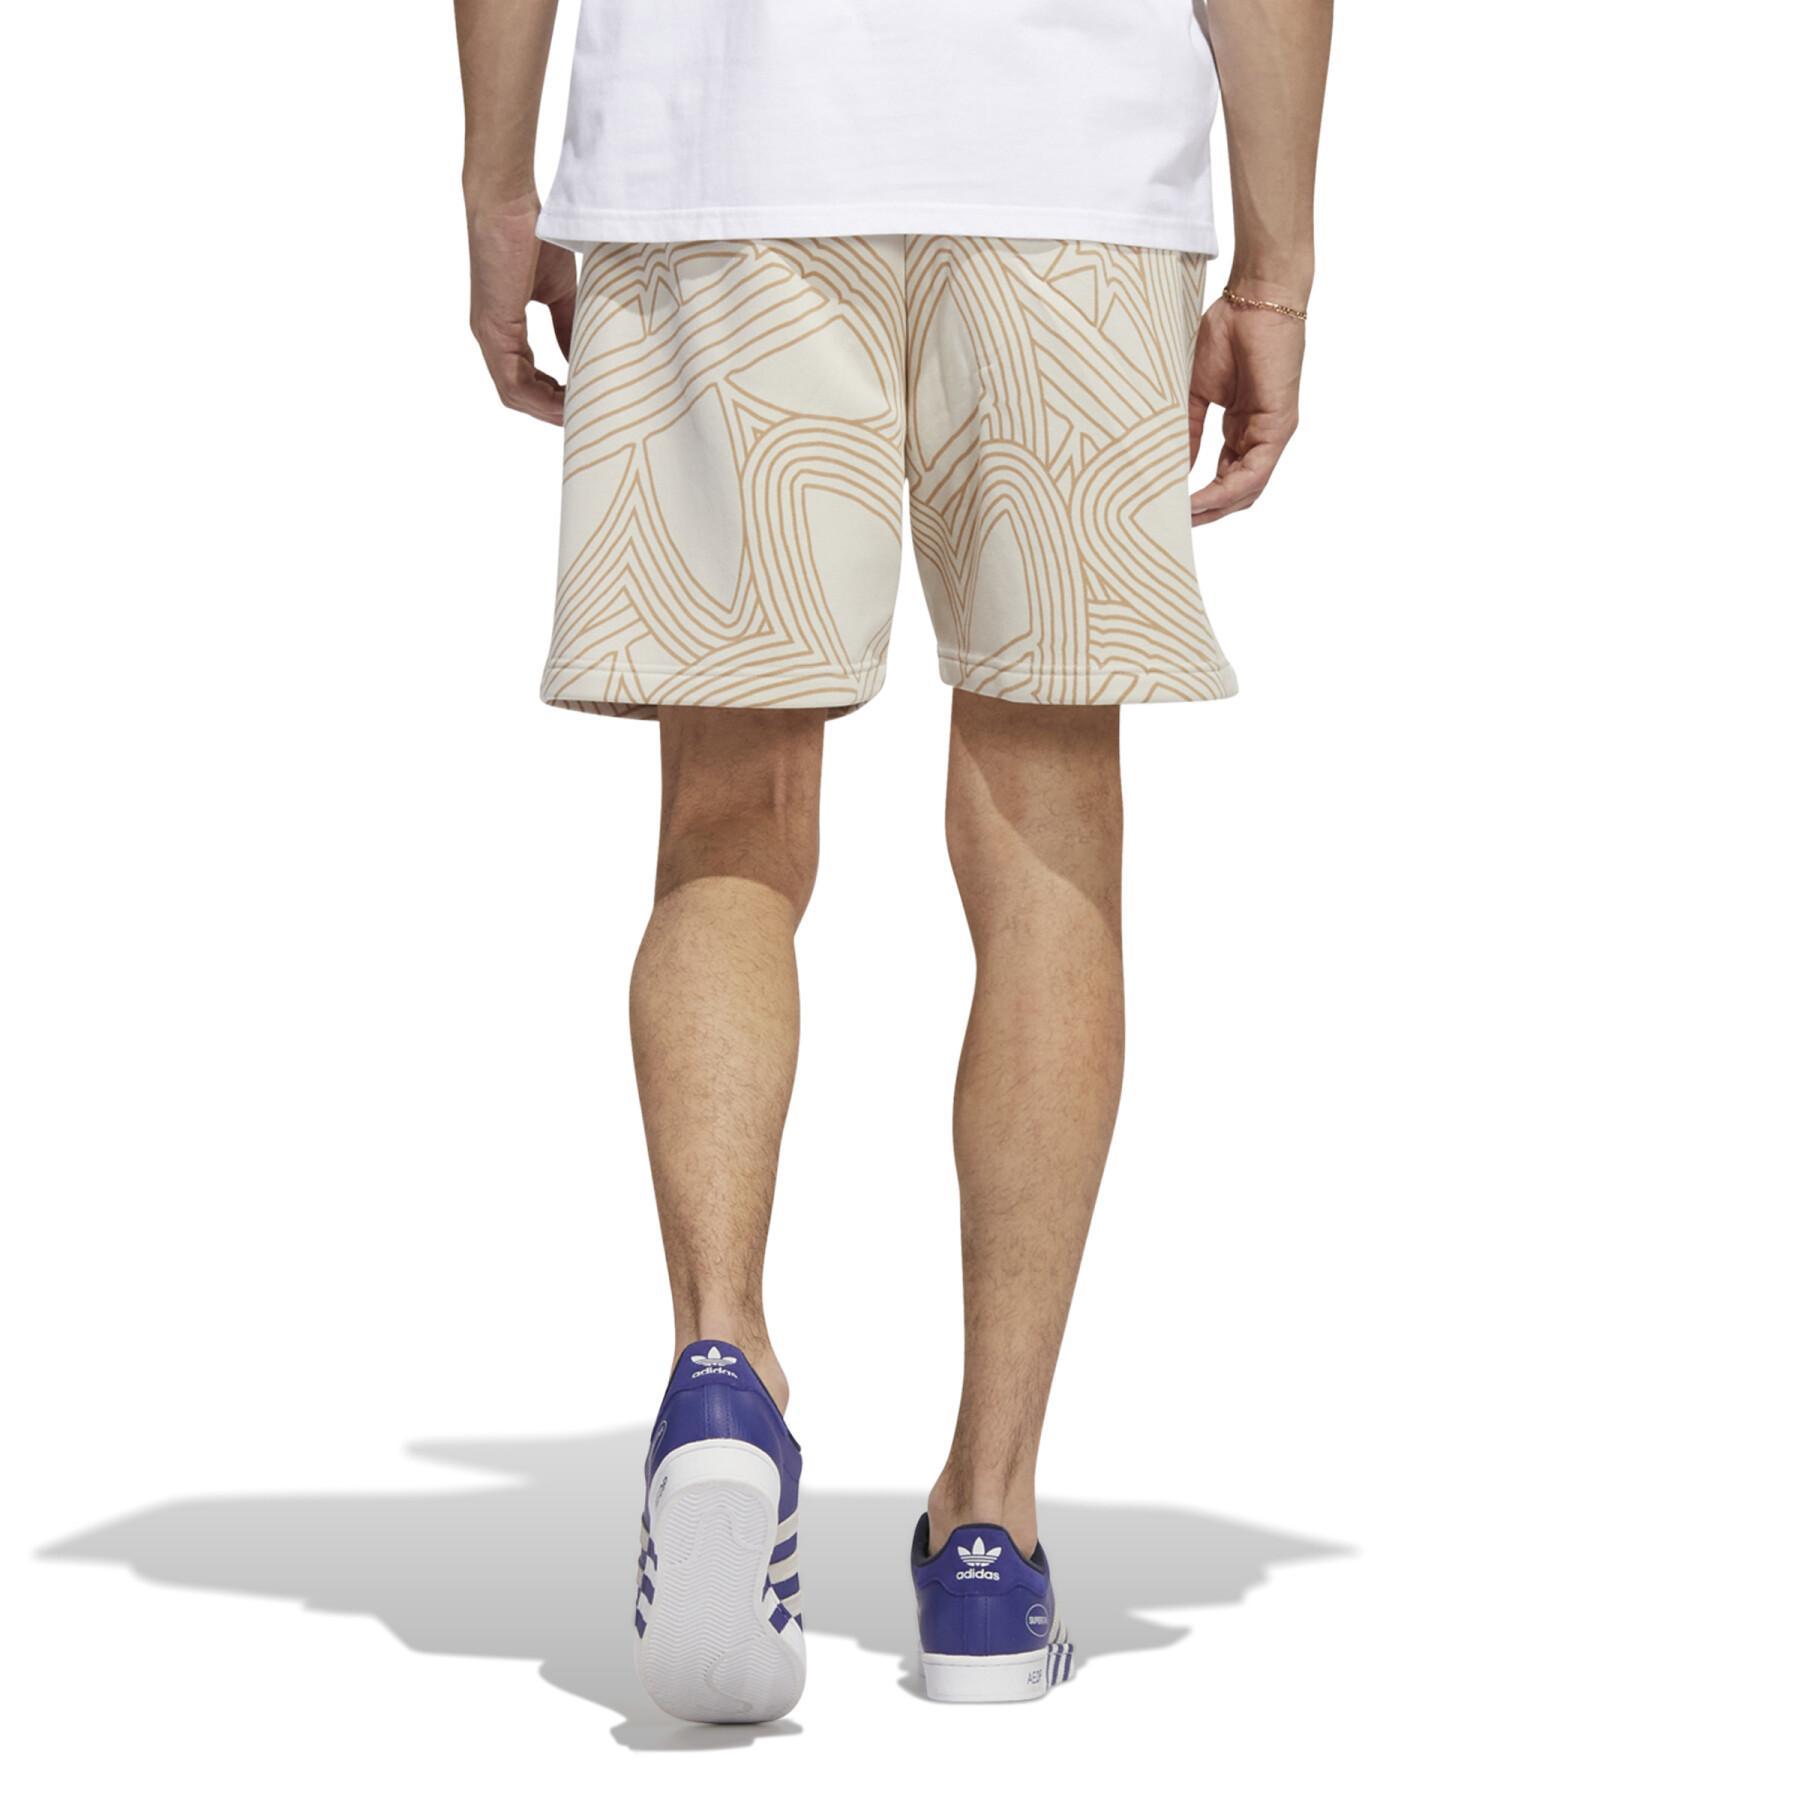 Shorts printed on the whole adidas Originals Athletic Club